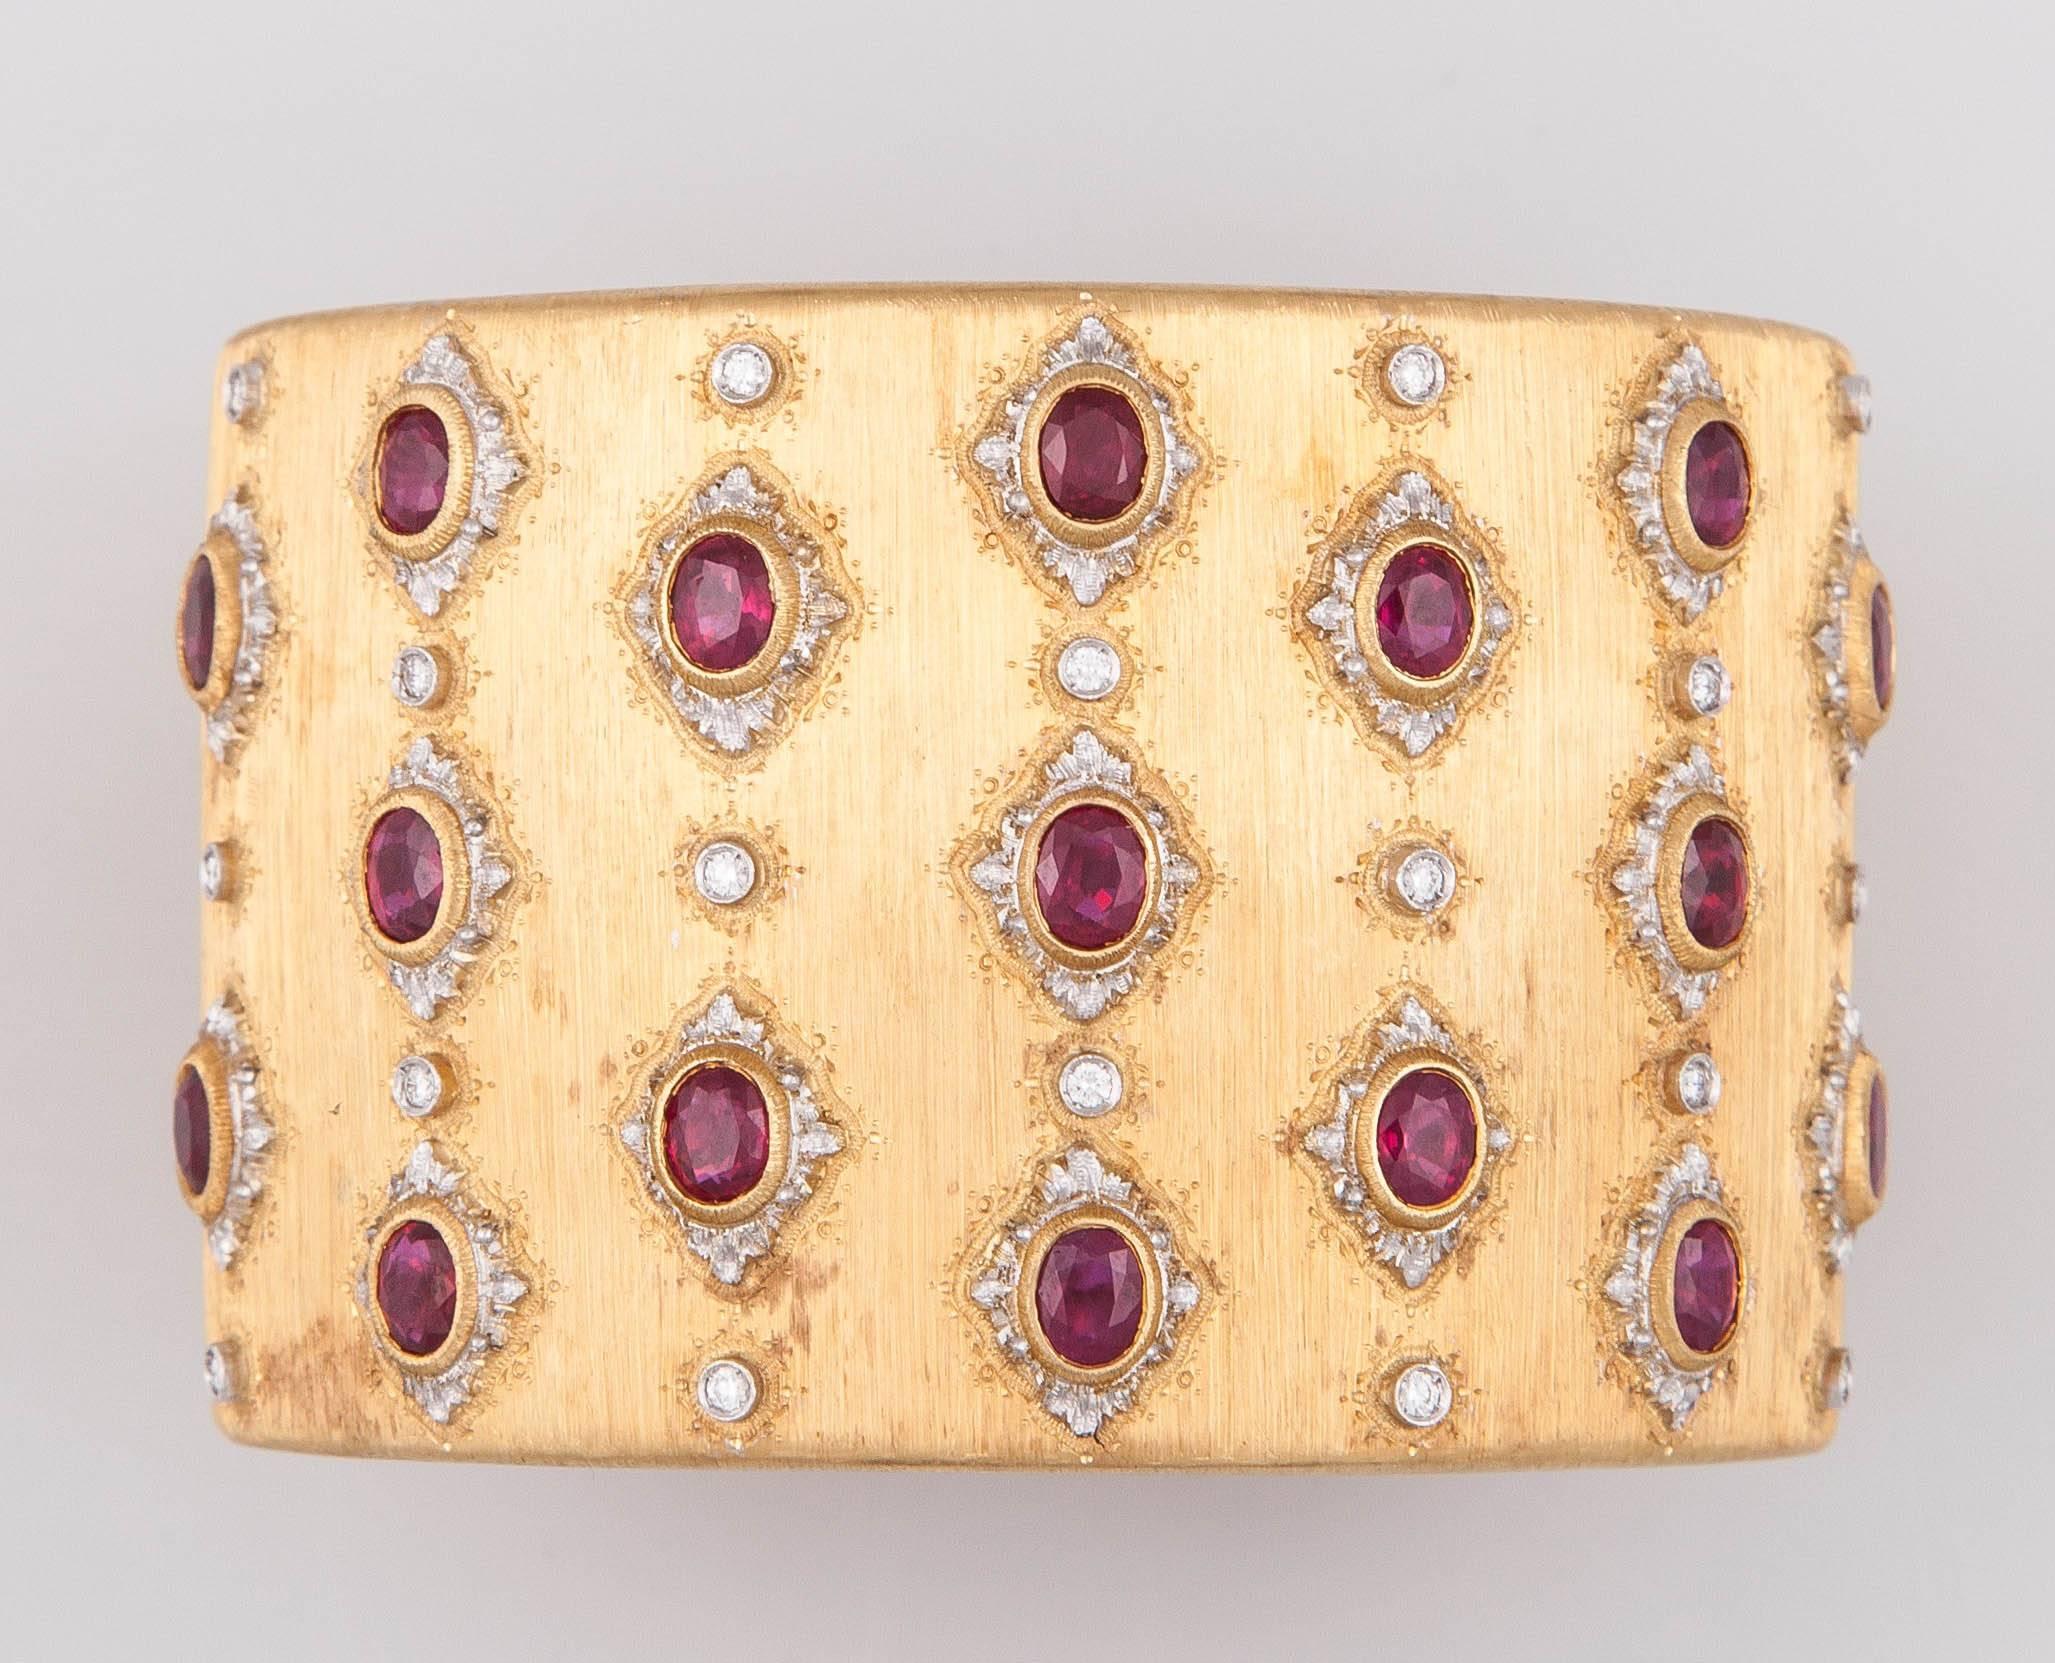 Elegant Cuff Bracelet with White Diamonds and Rubies, finely crafted in 18 k yellow gold by Mario Buccellati